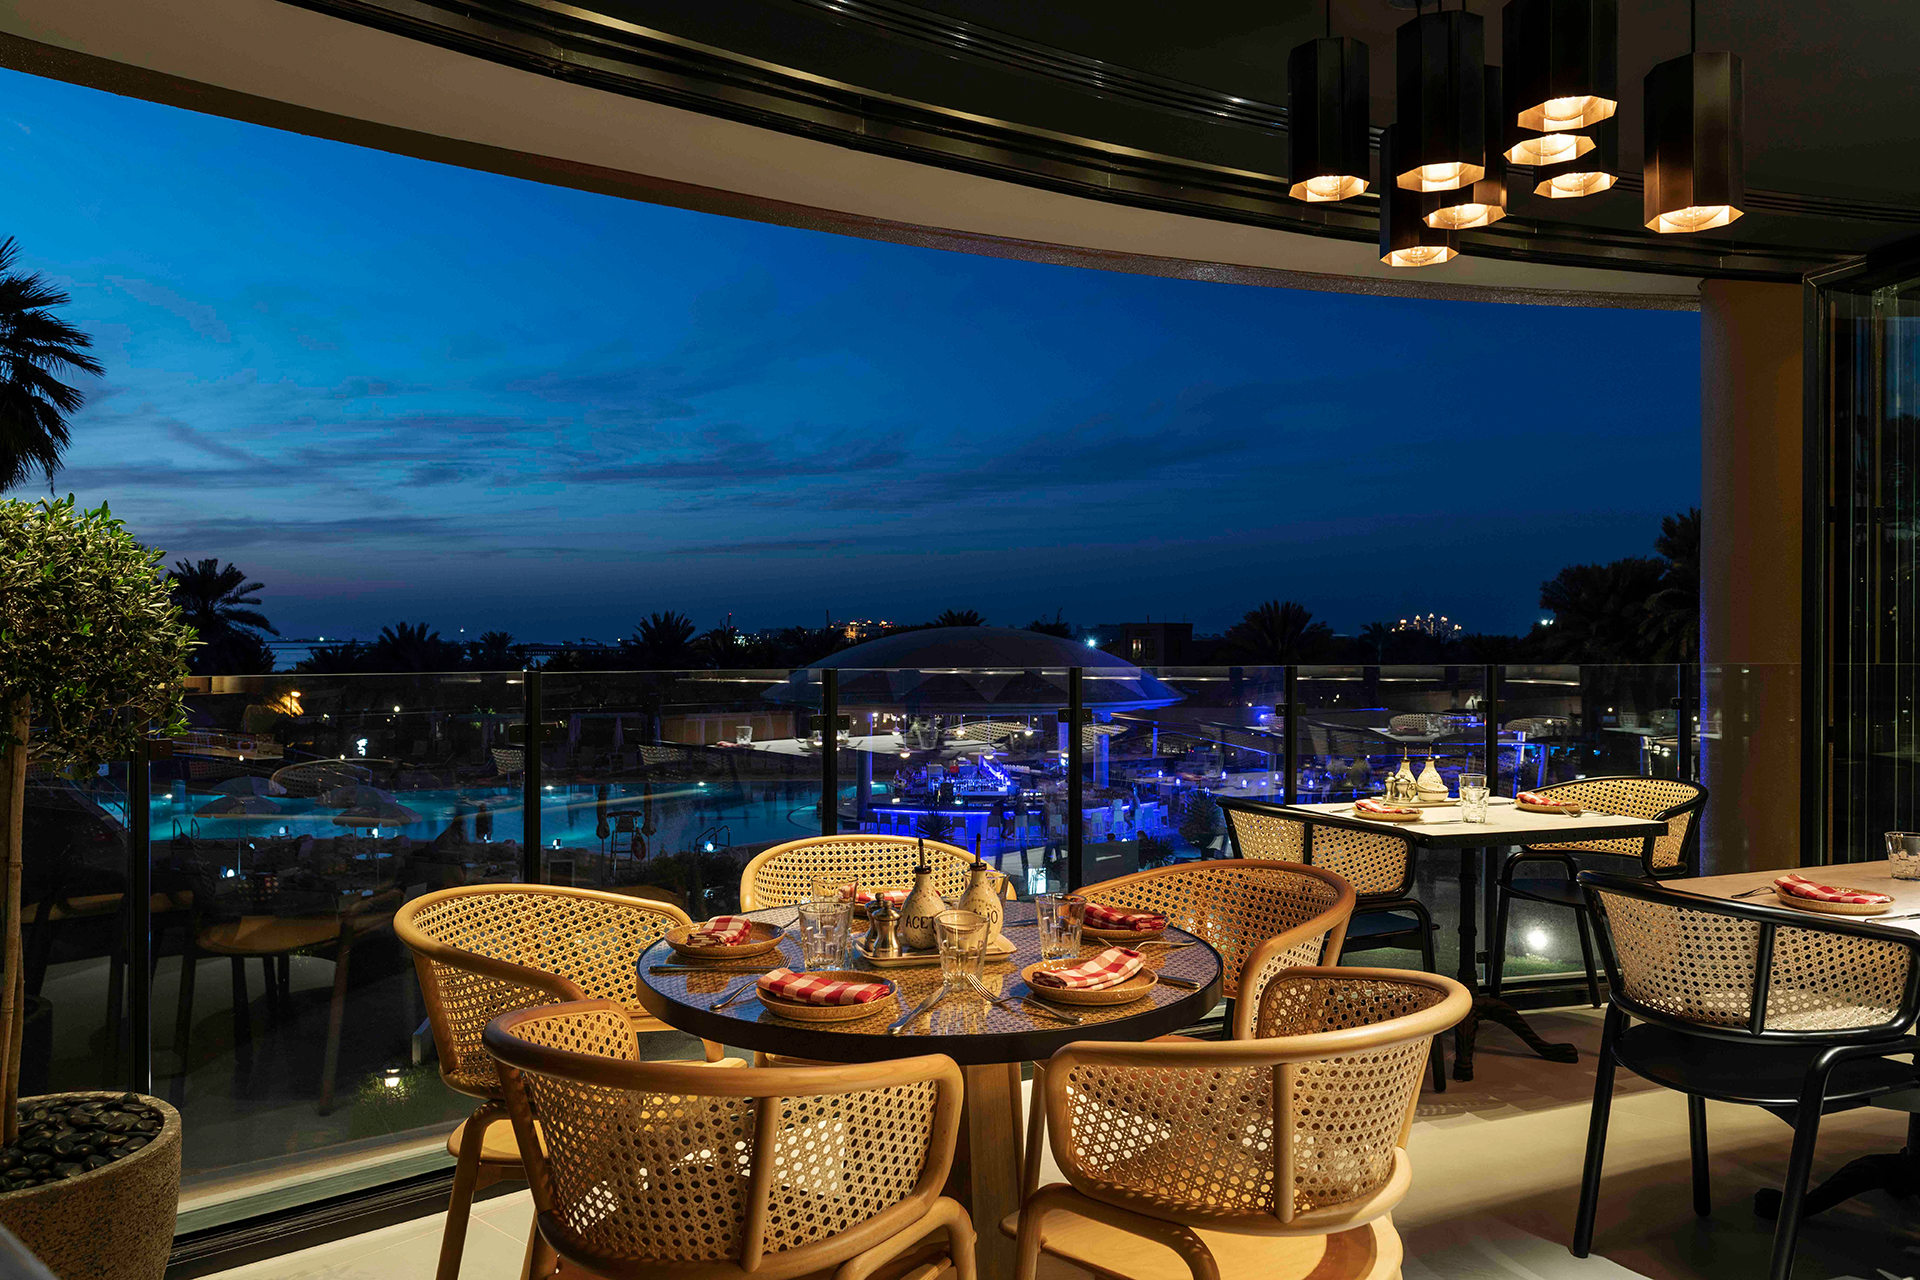 Brand-new Italian restaurant launches with sea views | Time Out Dubai